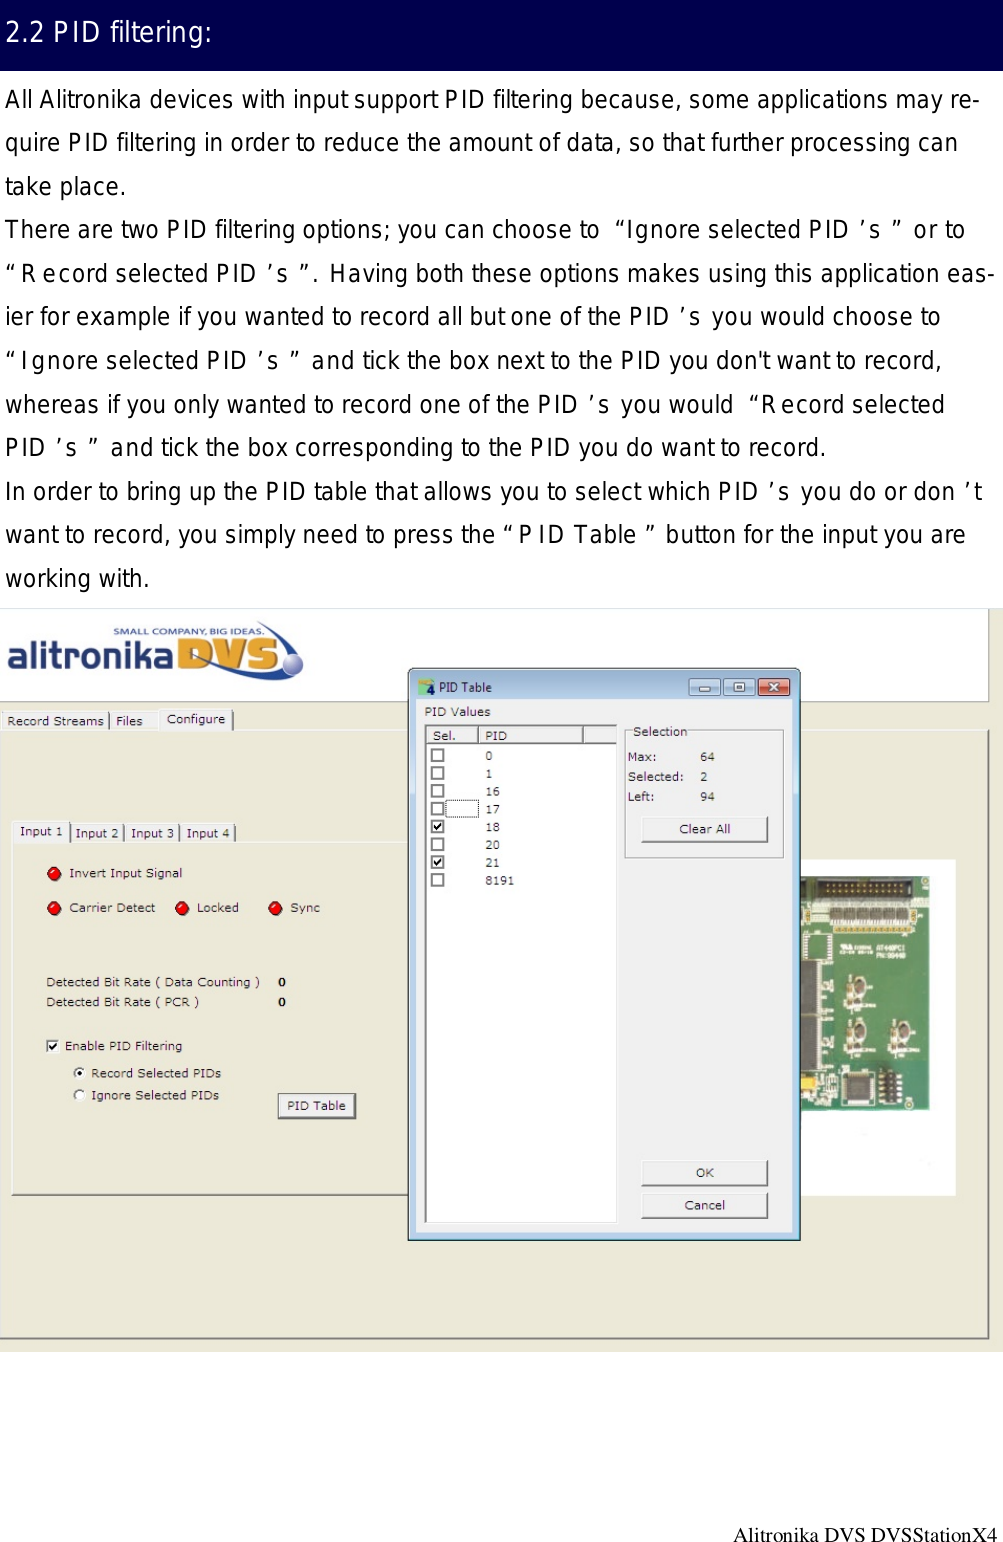 Alitronika DVS DVSStationX4                                                                                                   2.2 PID filtering: All Alitronika devices with input support PID filtering because, some applications may re-quire PID filtering in order to reduce the amount of data, so that further processing can take place.  There are two PID filtering options; you can choose to “Ignore selected PID’s” or to “Record selected PID’s”. Having both these options makes using this application eas-ier for example if you wanted to record all but one of the PID’s you would choose to “Ignore selected PID’s” and tick the box next to the PID you don&apos;t want to record, whereas if you only wanted to record one of the PID’s you would “Record selected PID’s” and tick the box corresponding to the PID you do want to record. In order to bring up the PID table that allows you to select which PID’s you do or don’t want to record, you simply need to press the “PID Table” button for the input you are working with.  